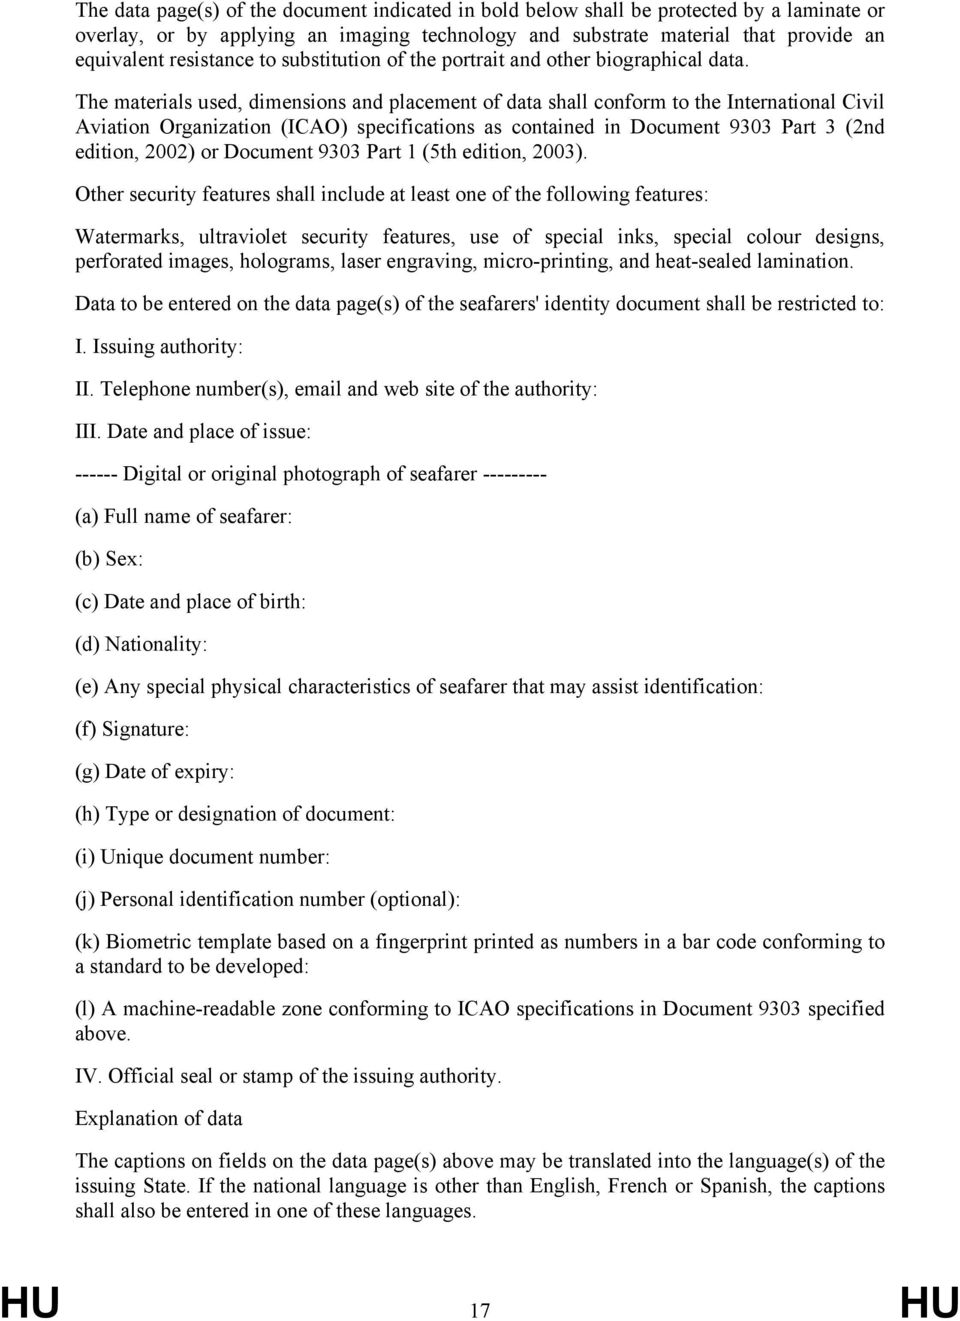 The materials used, dimensions and placement of data shall conform to the International Civil Aviation Organization (ICAO) specifications as contained in Document 9303 Part 3 (2nd edition, 2002) or